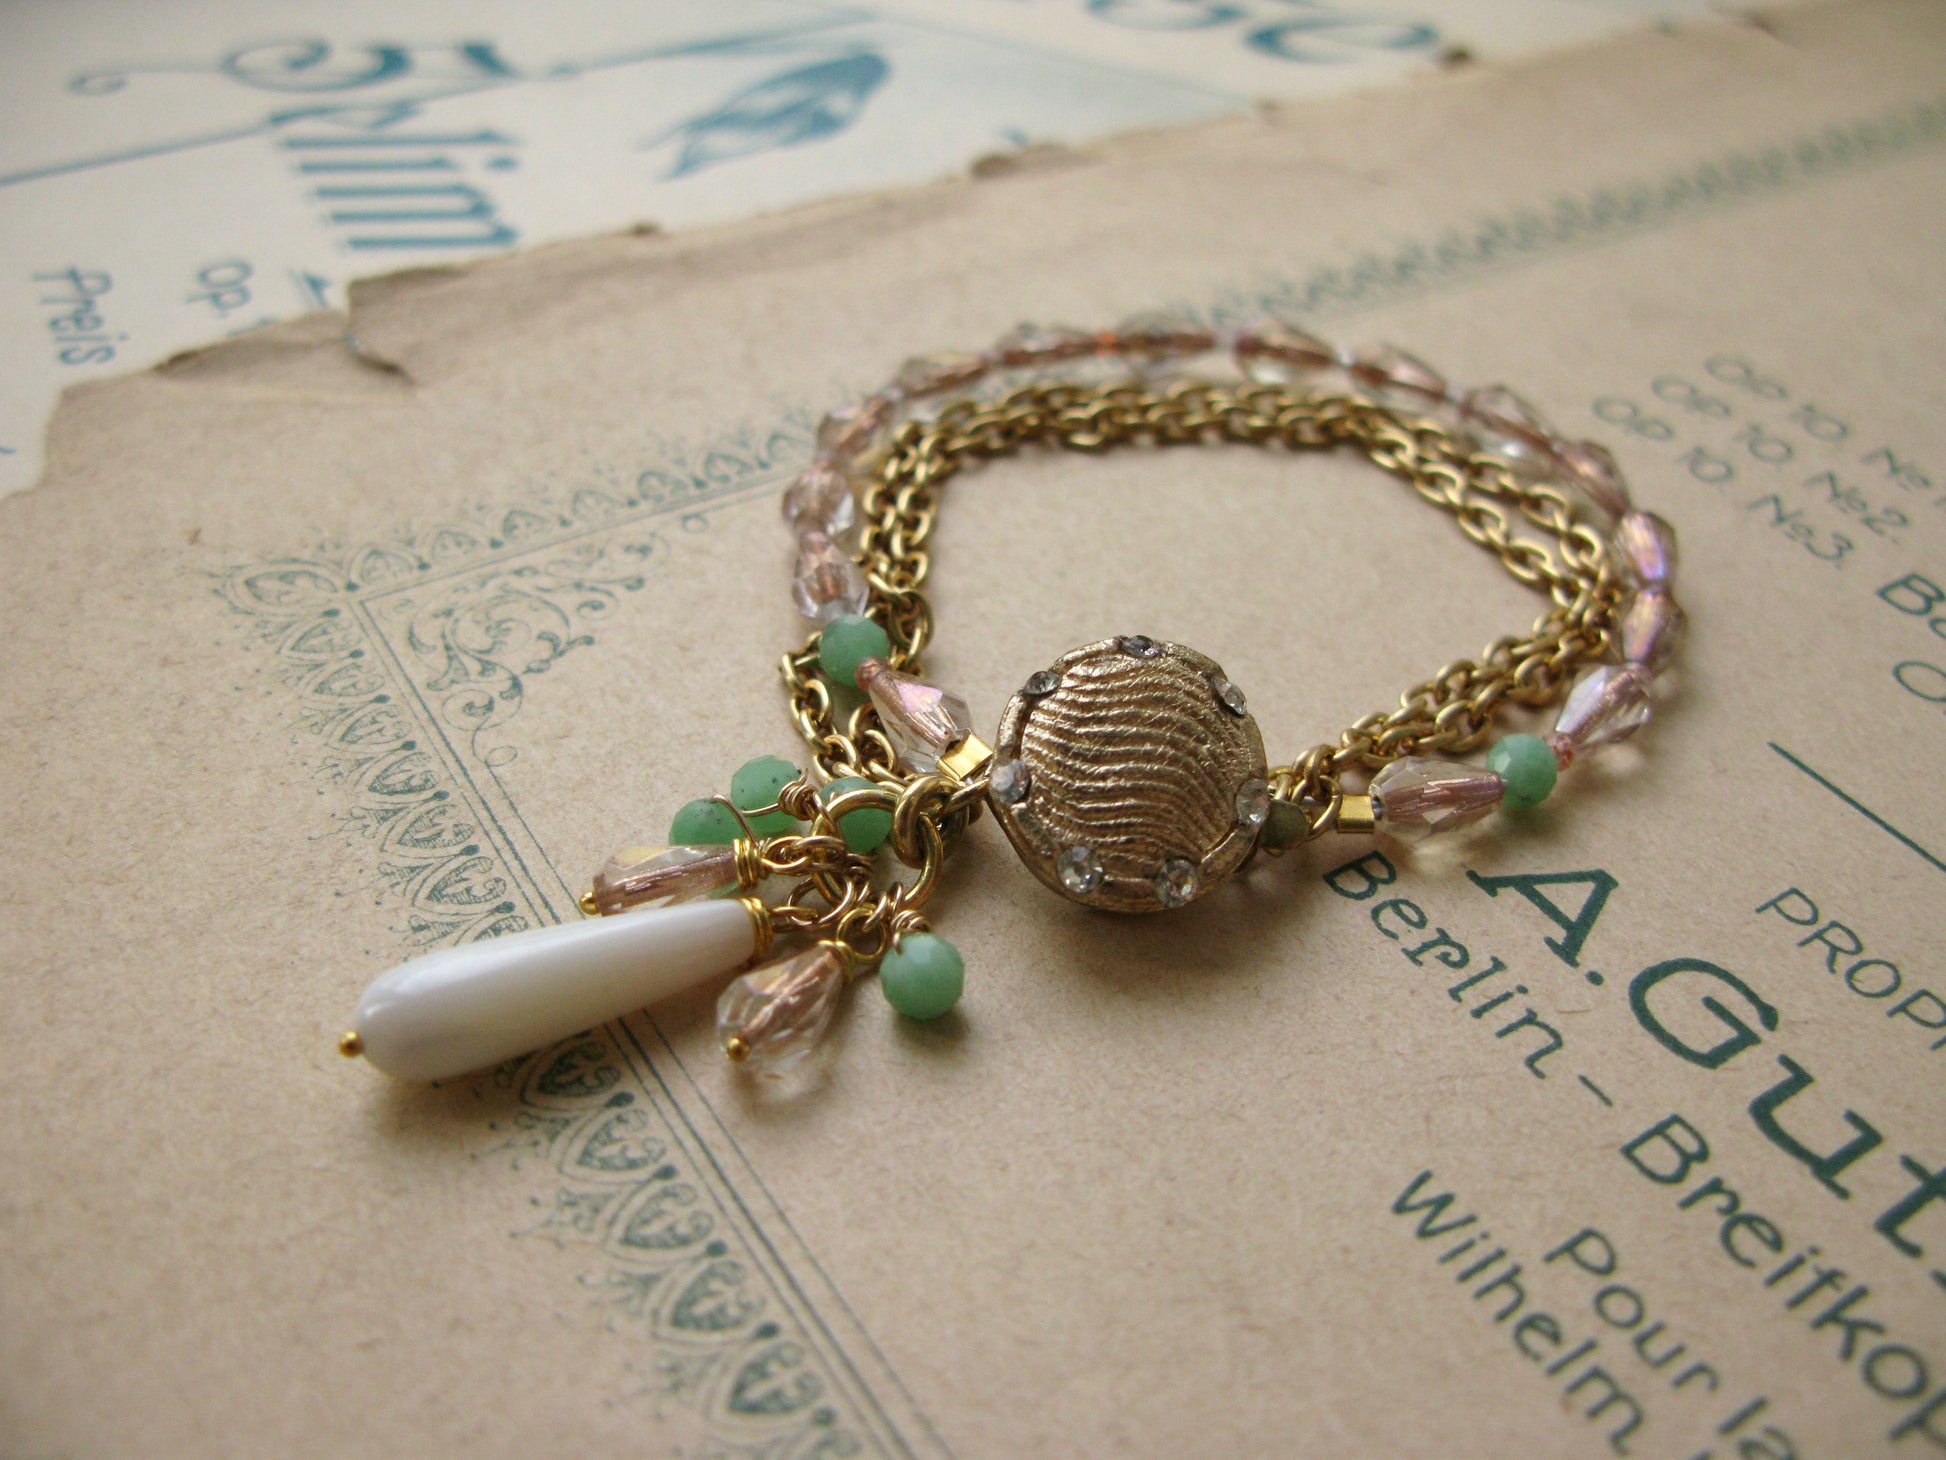 Gold tone bracelet with chains, glass and gemstone beads.